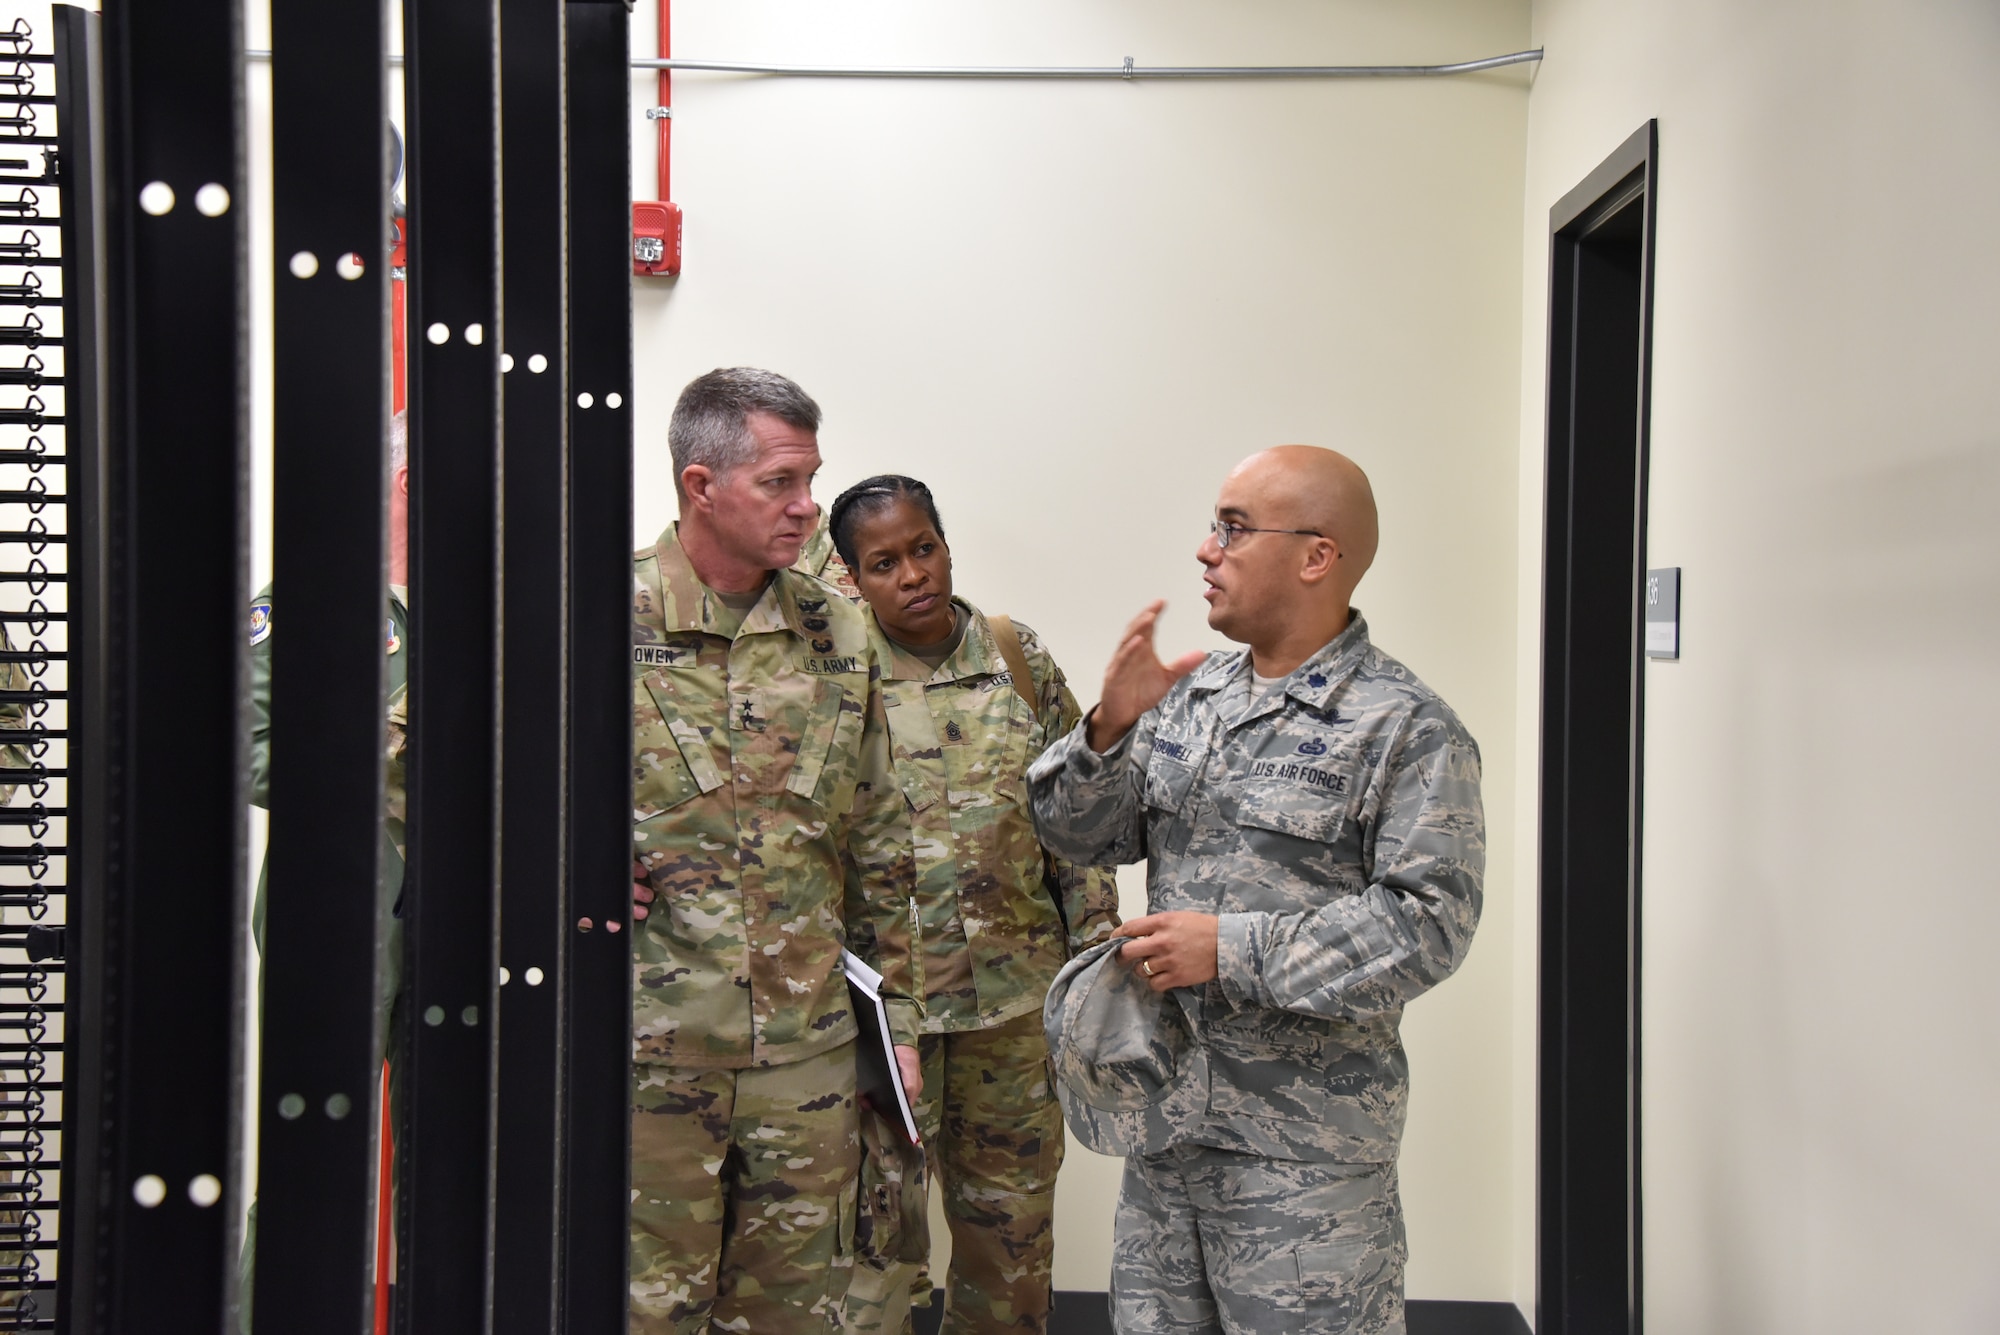 U.S. Air Force Lt. Col. Joed Carbonell, 175th Cyberspace Operations Group deputy commander, gives U.S. Army Maj. Gen. Timothy E. Gowen, adjutant general for Maryland, a tour of the new cyber building Oct. 6, 2019 during his initial visit to the Maryland Air National Guard’s 175th Wing in Middle River, Md.